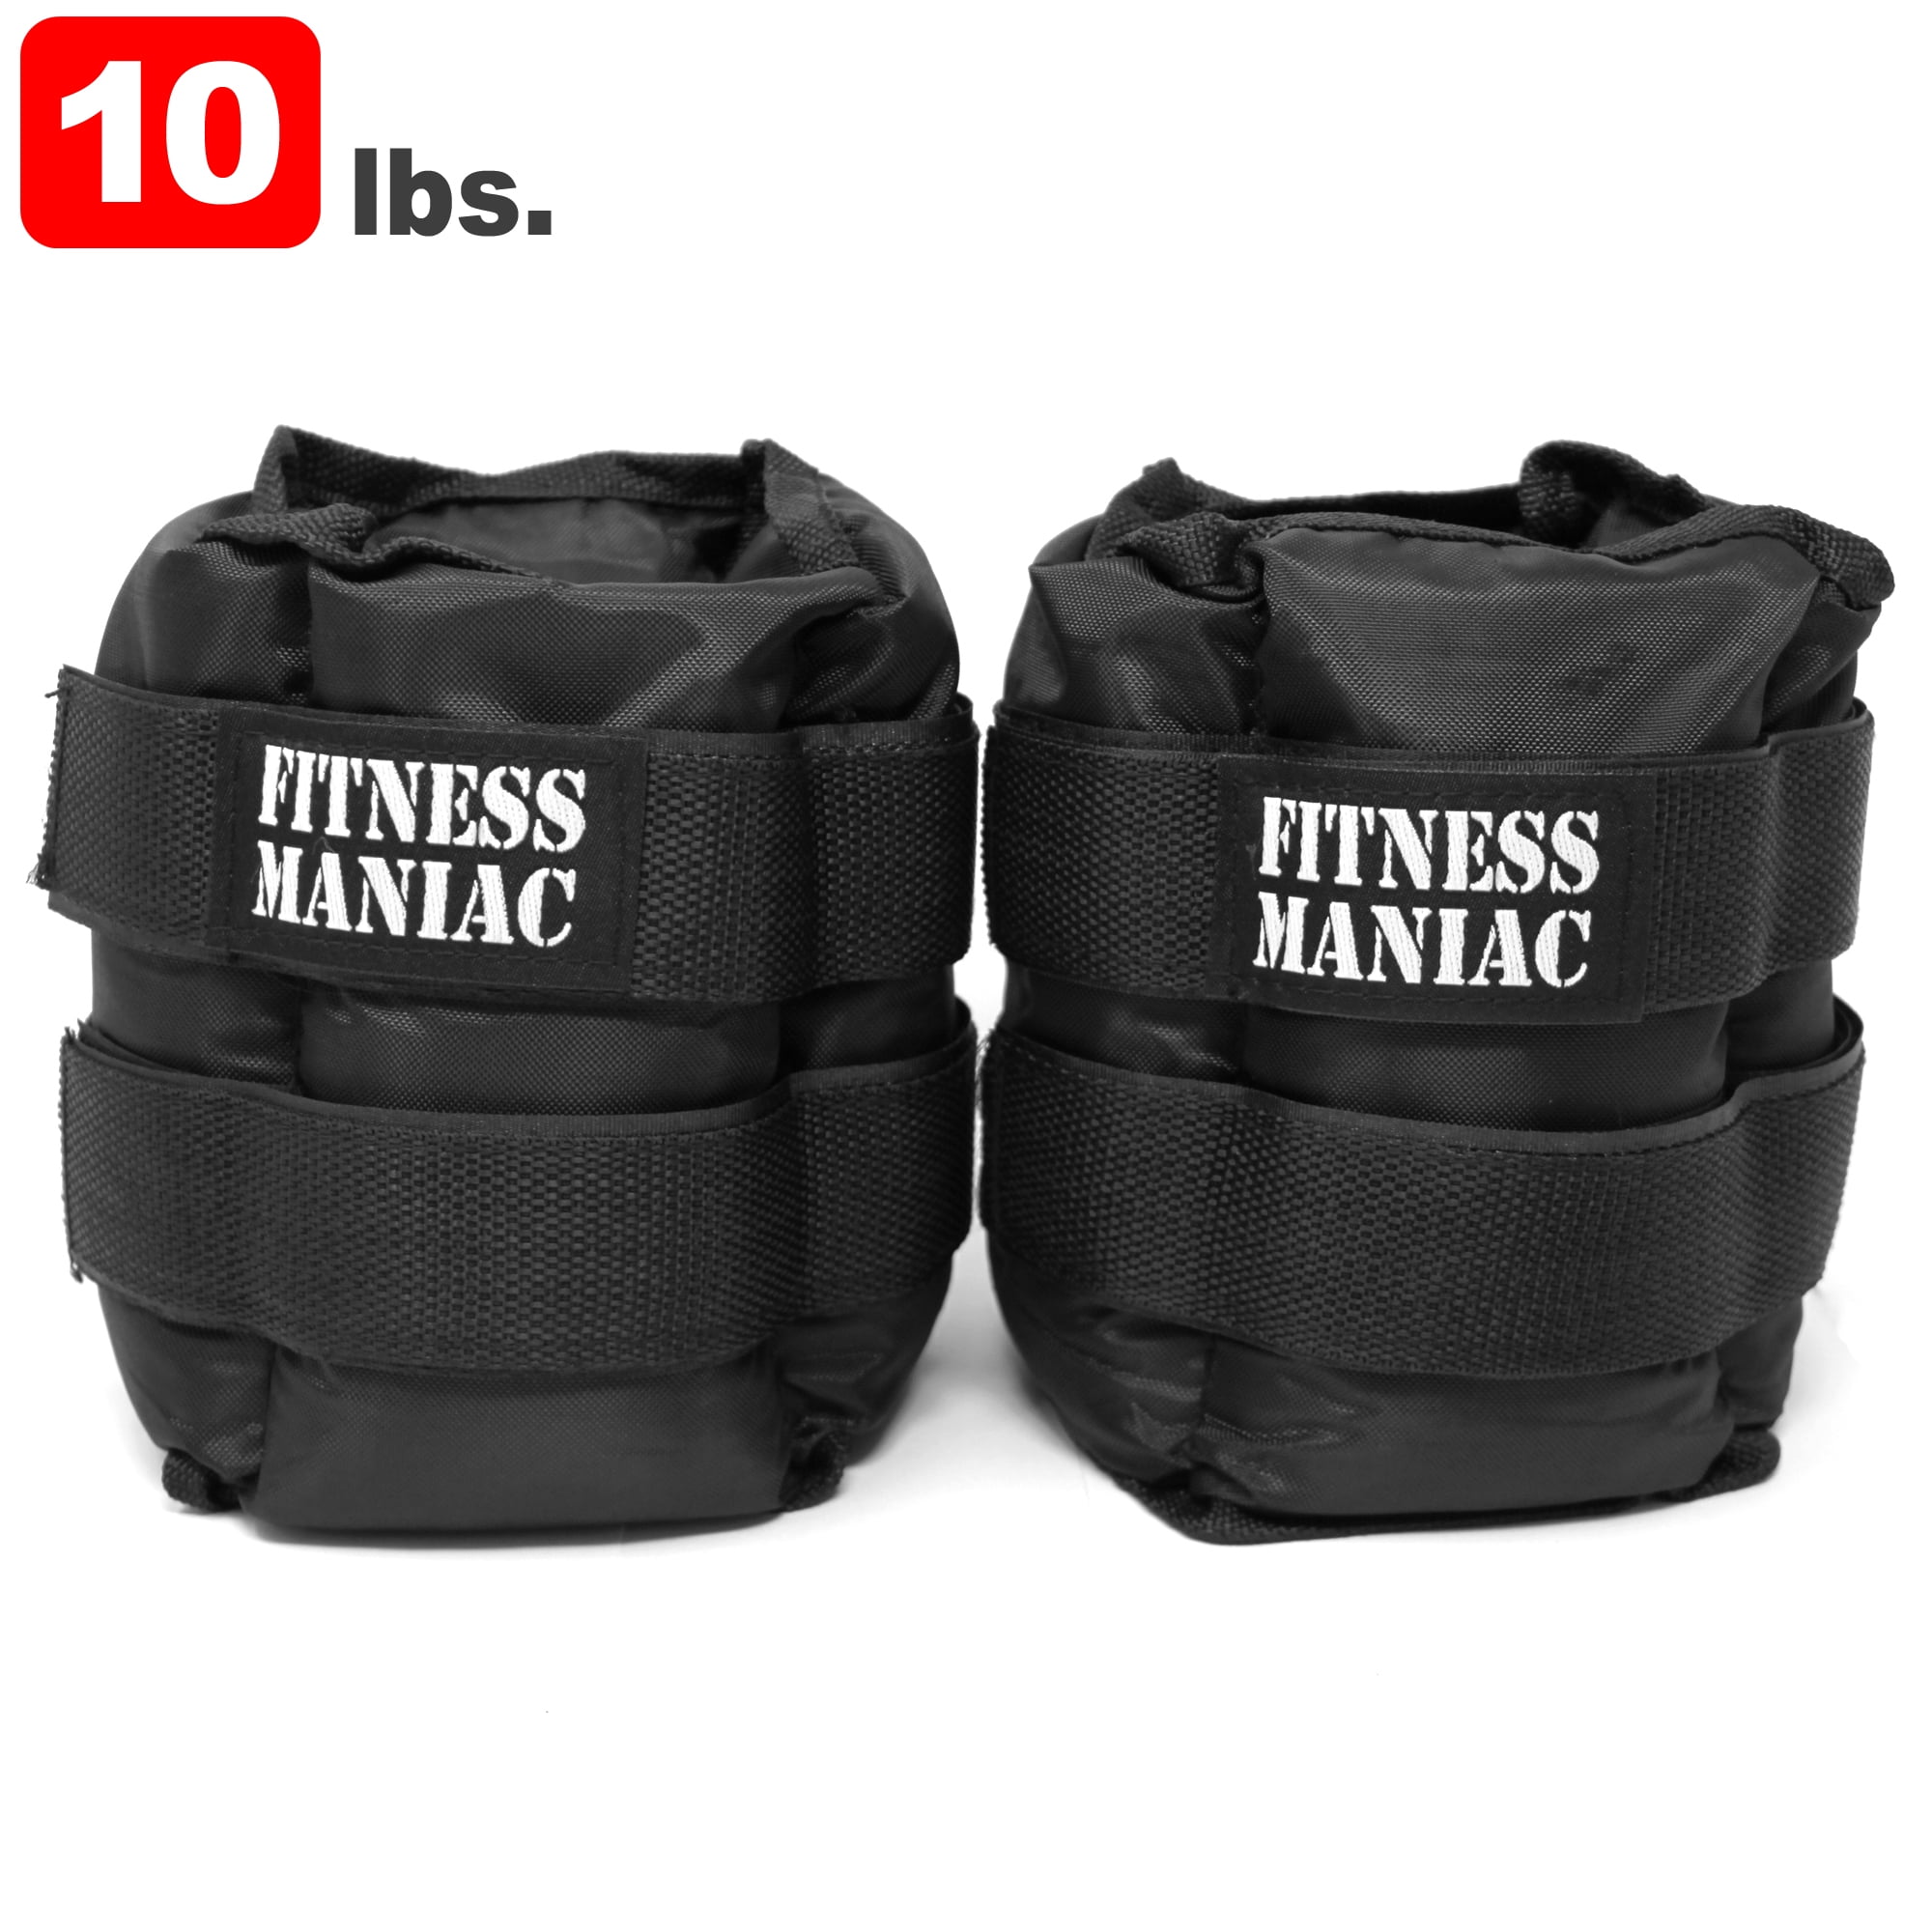 Ankle Wrist Weights 20 Lbs Pair Adjustable Strength Muscle Body Building Black 